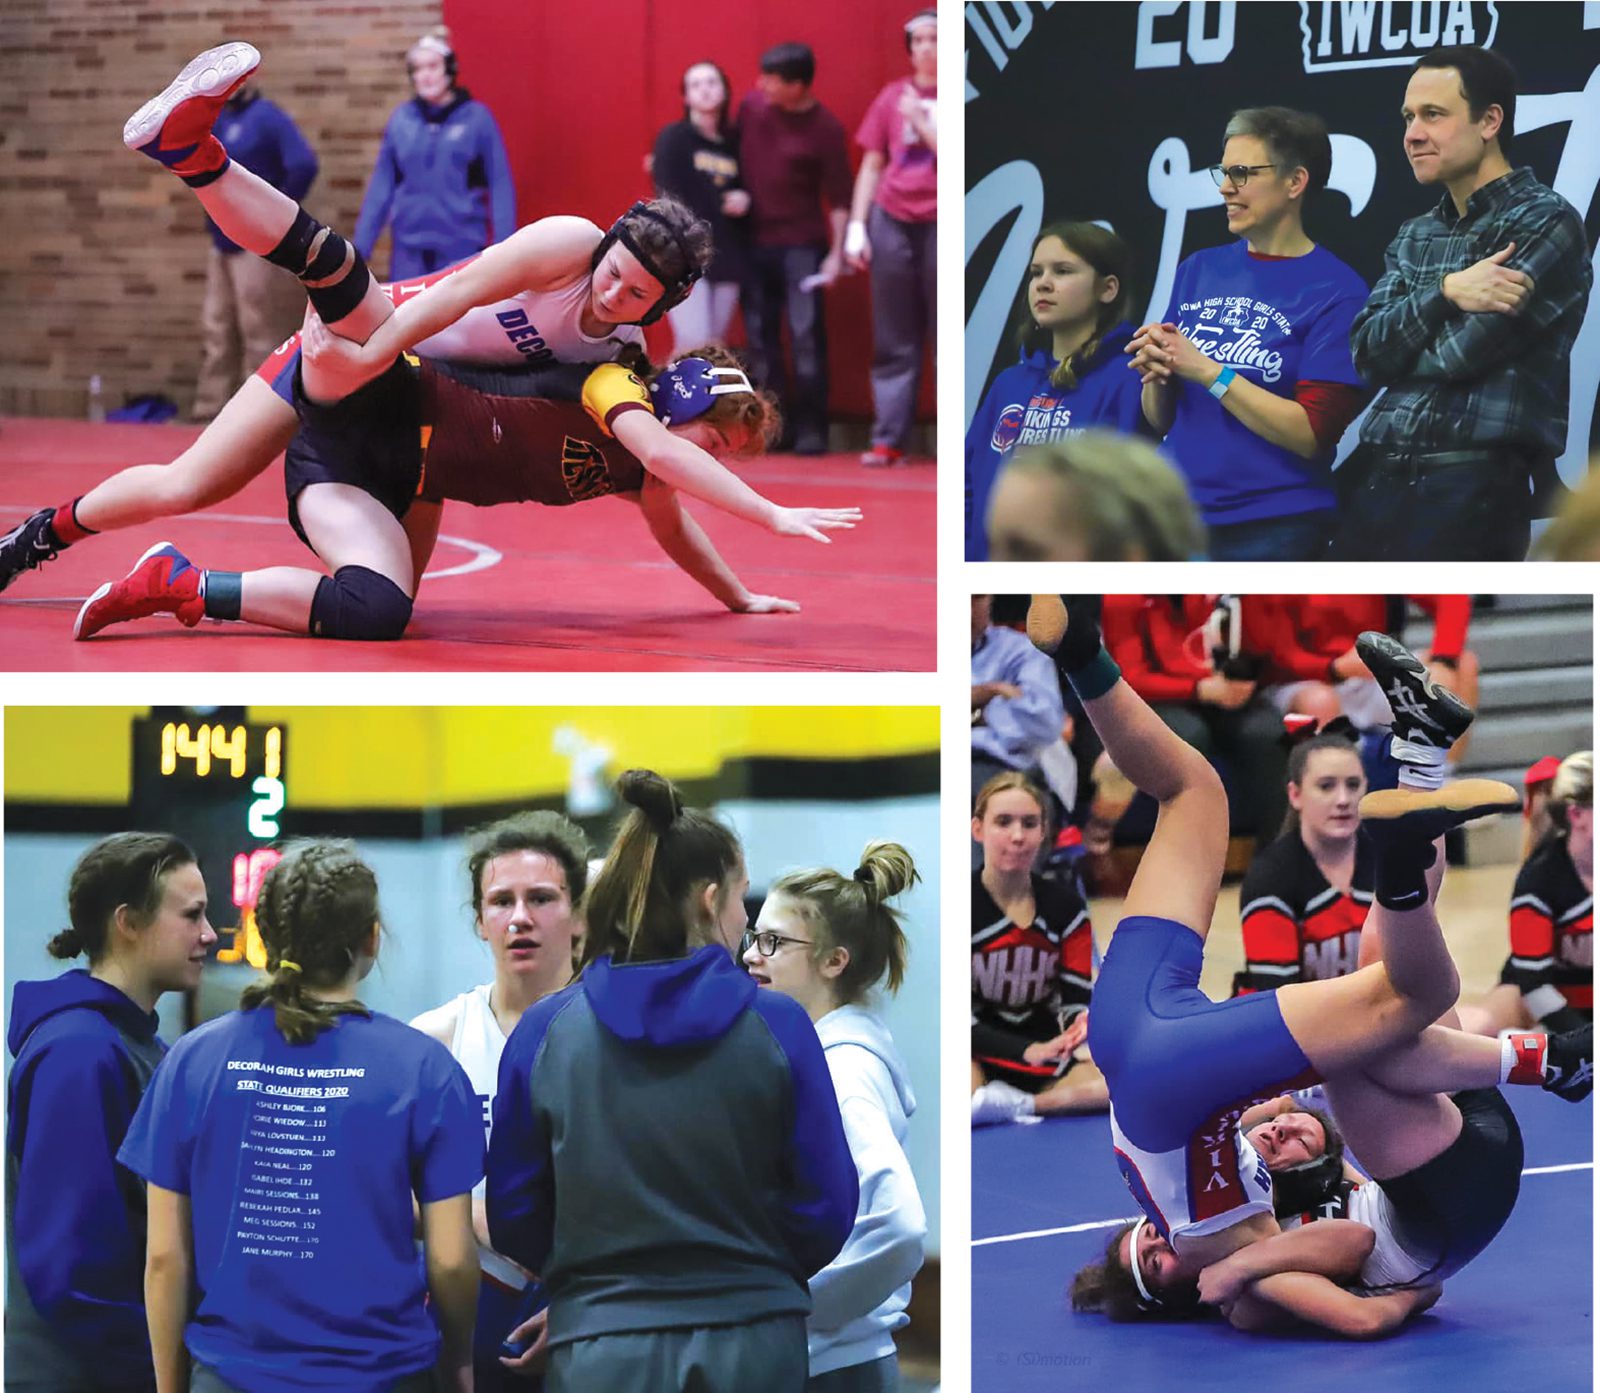 Sisters Meg Sessions and Mairi Sessions wrestling for Decorah High School